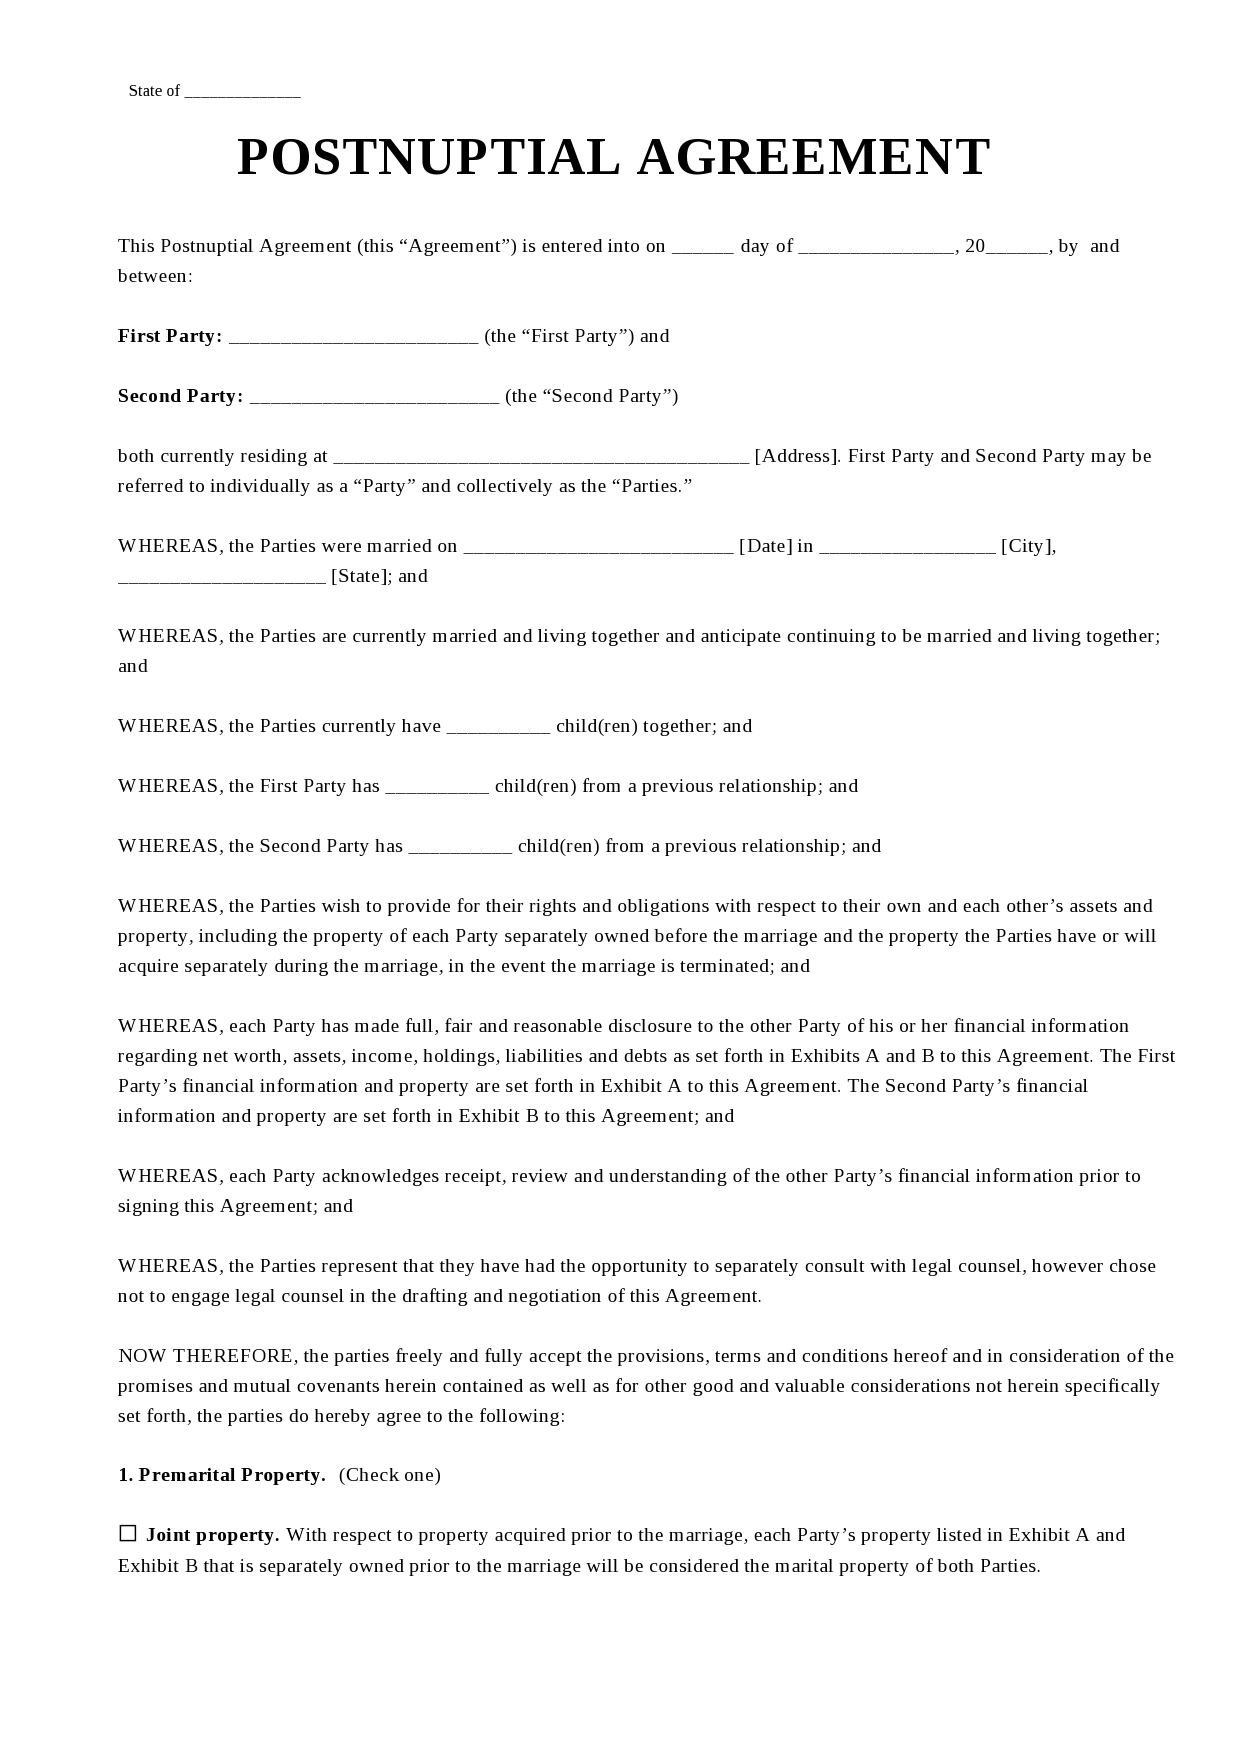 Free postnuptial agreement template 07